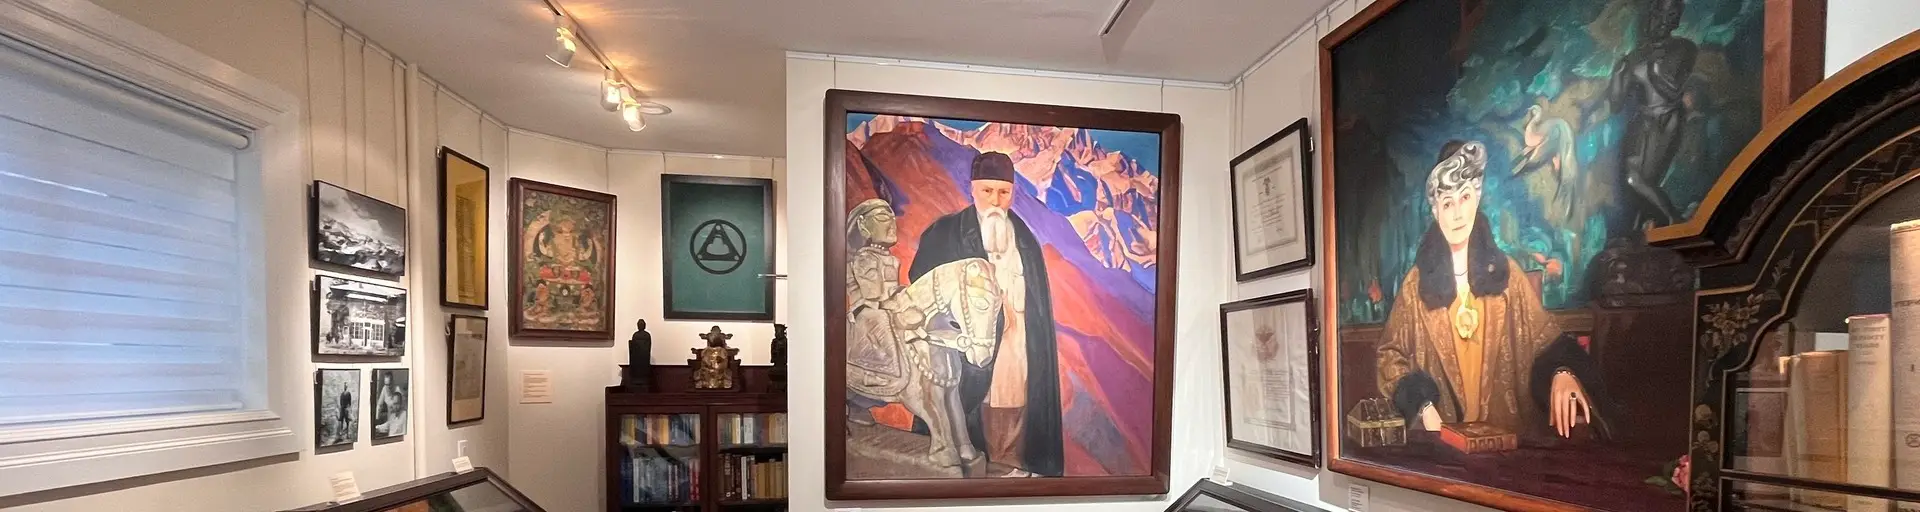 Roerich Art Gallery Featured Image